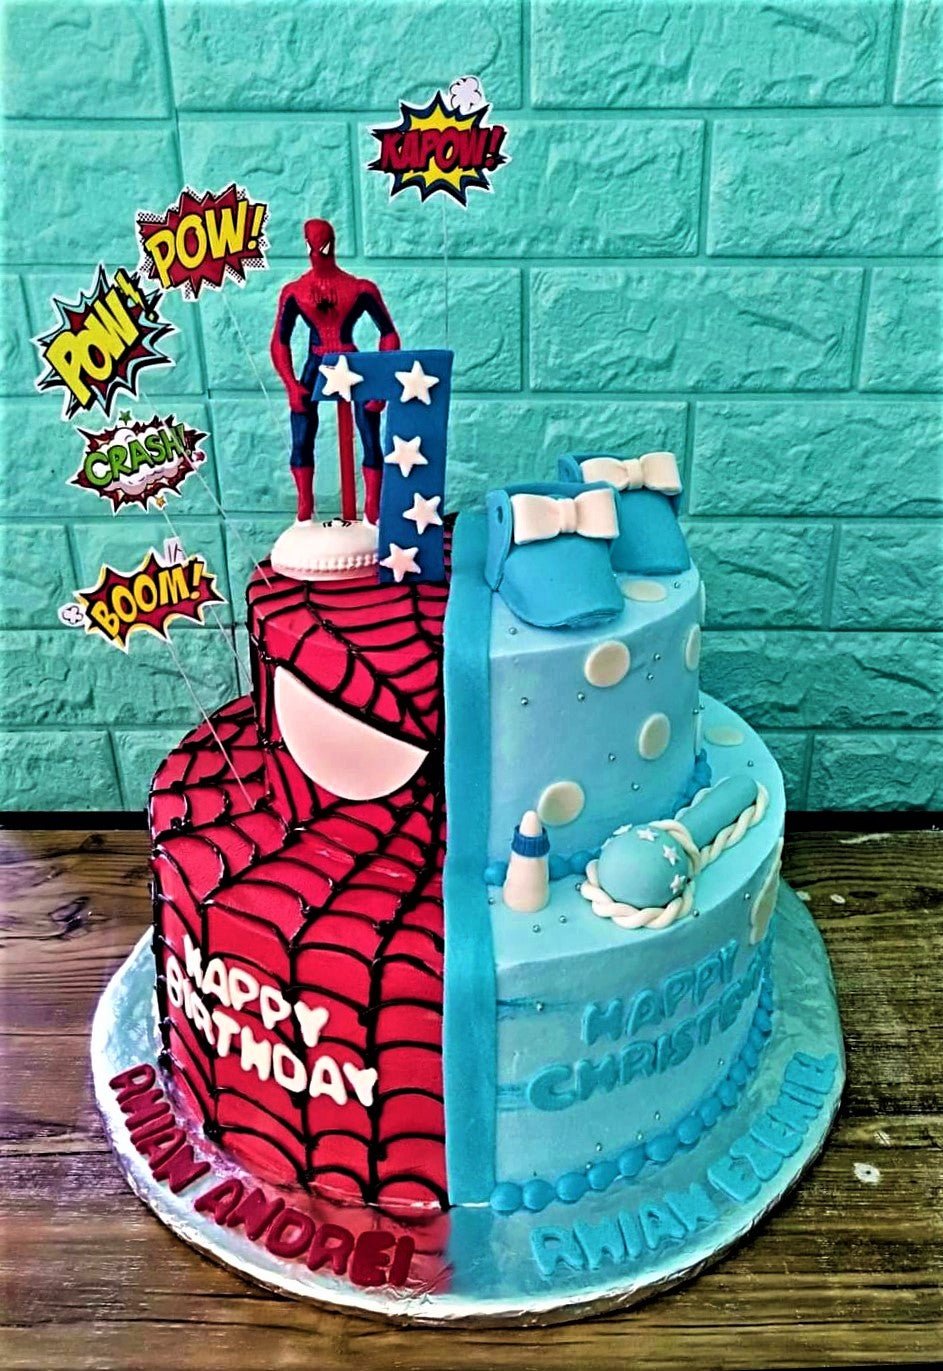 Spiderman Cakes For Birthday, Anniversary, Any Event - FNP AE